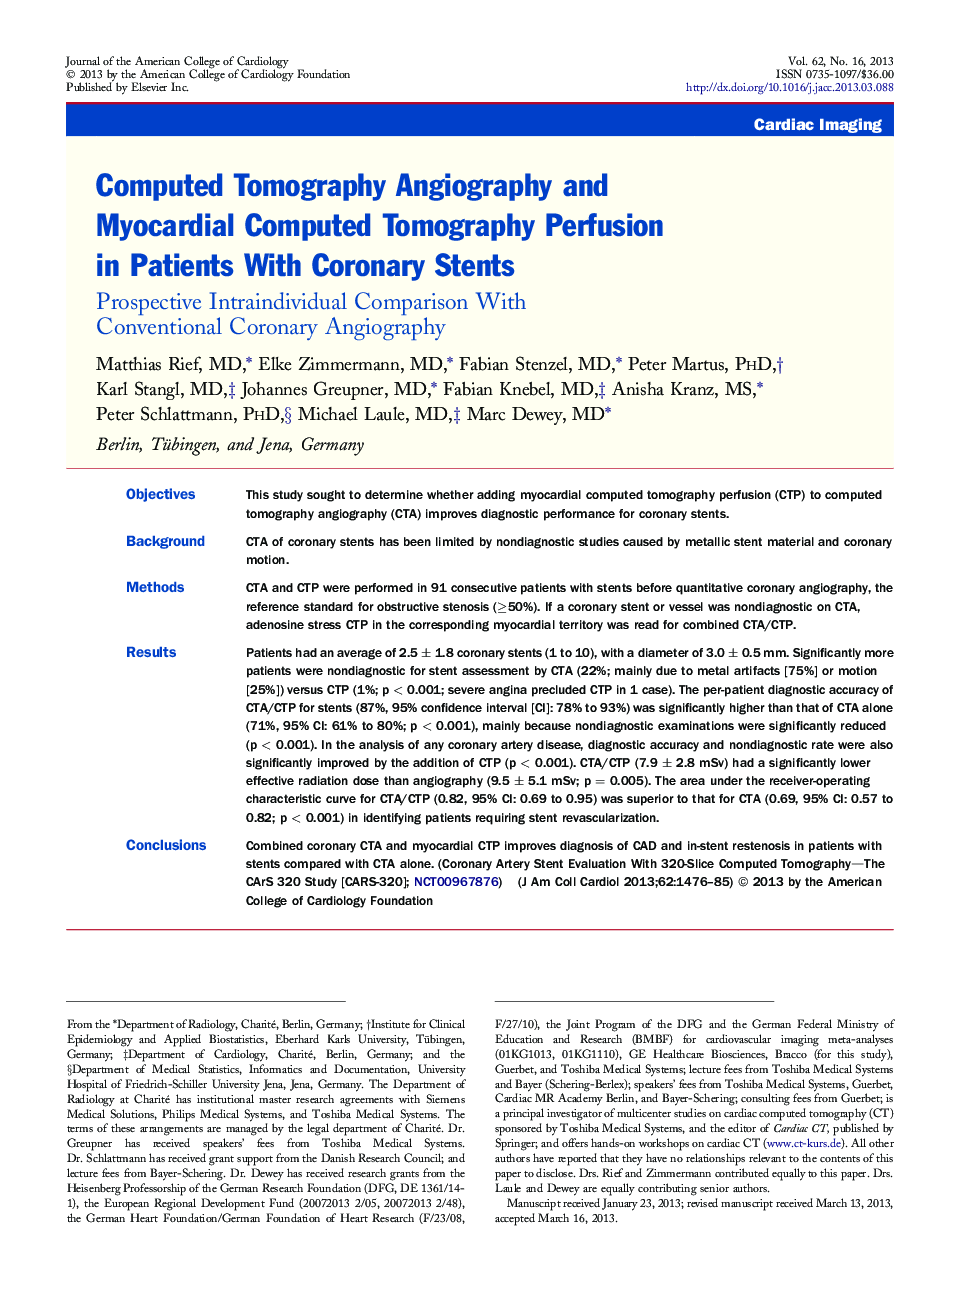 Computed Tomography Angiography and Myocardial Computed Tomography Perfusion in Patients With Coronary Stents : Prospective Intraindividual Comparison With Conventional Coronary Angiography